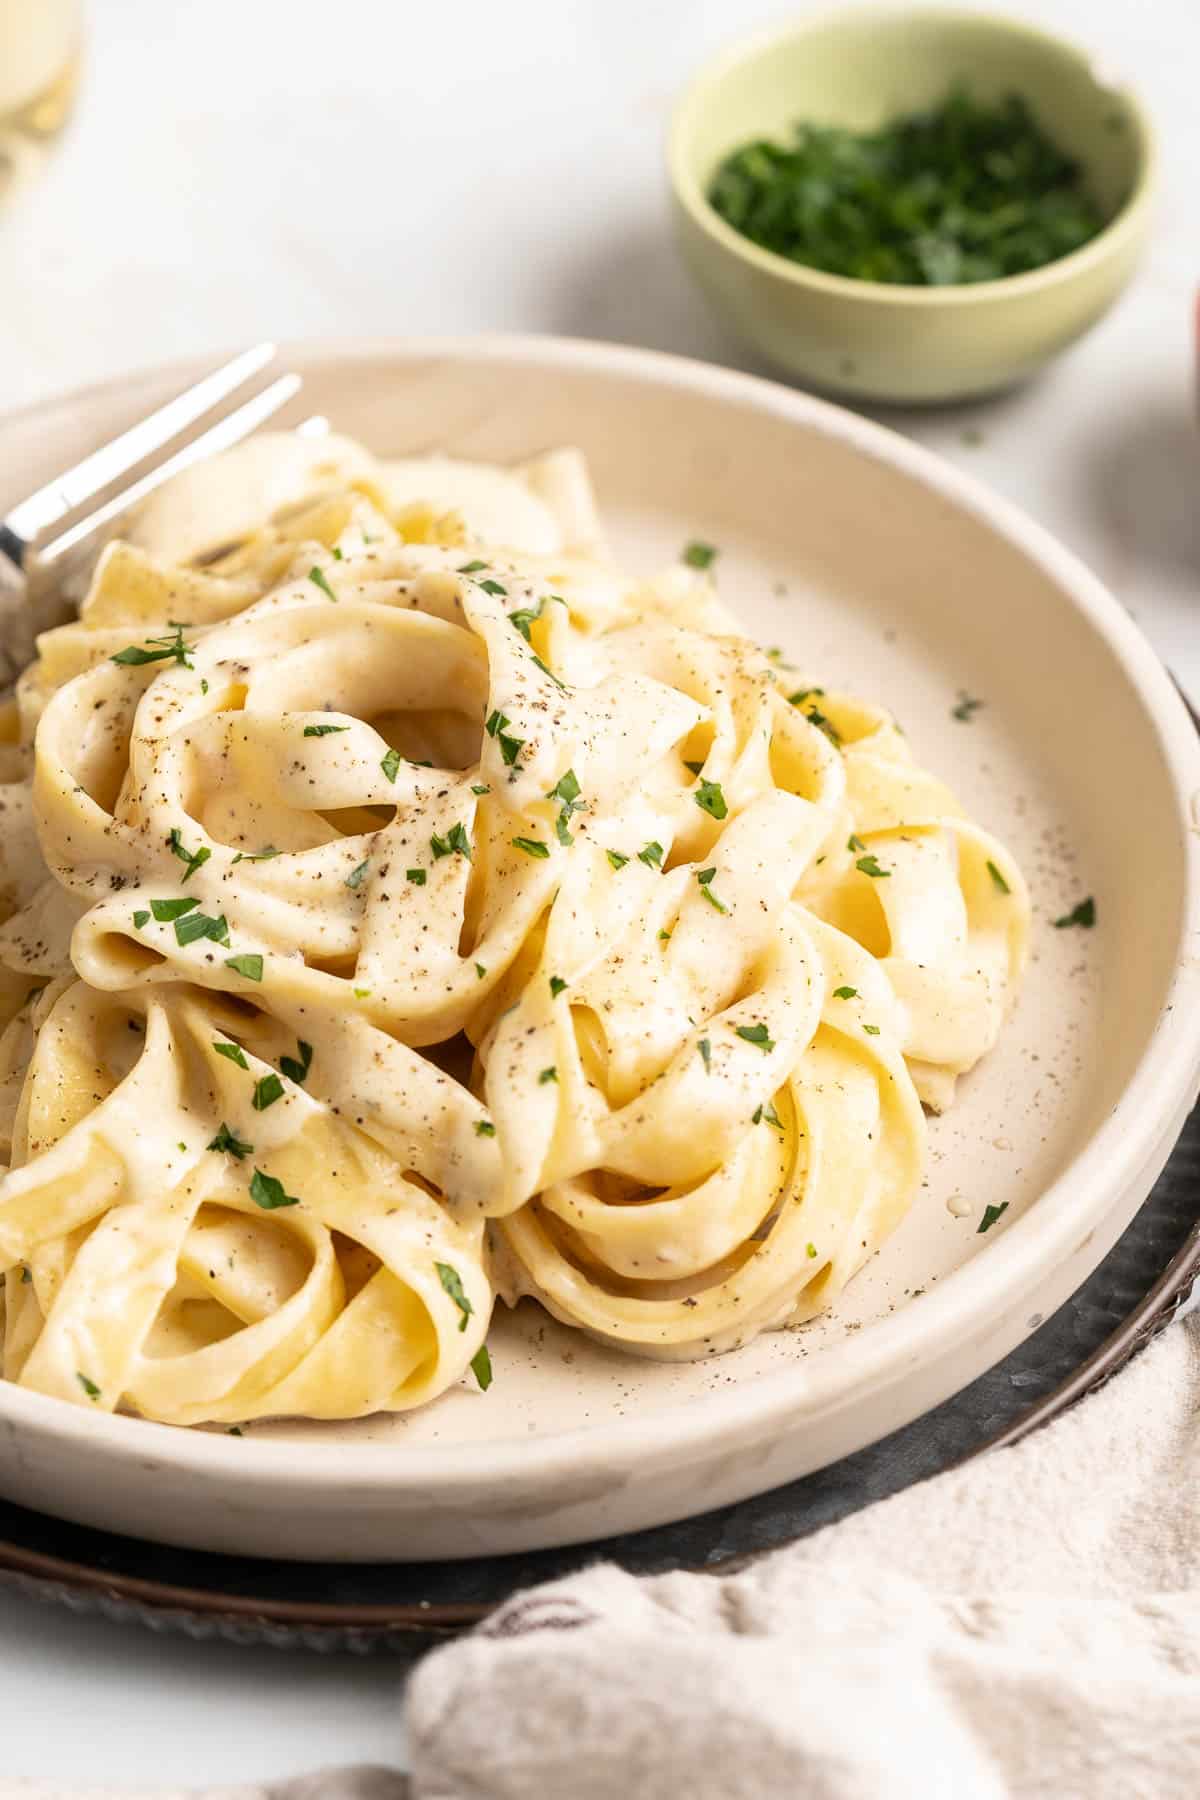 Homemade pasta with alfredo sauce on a plate with a fork.